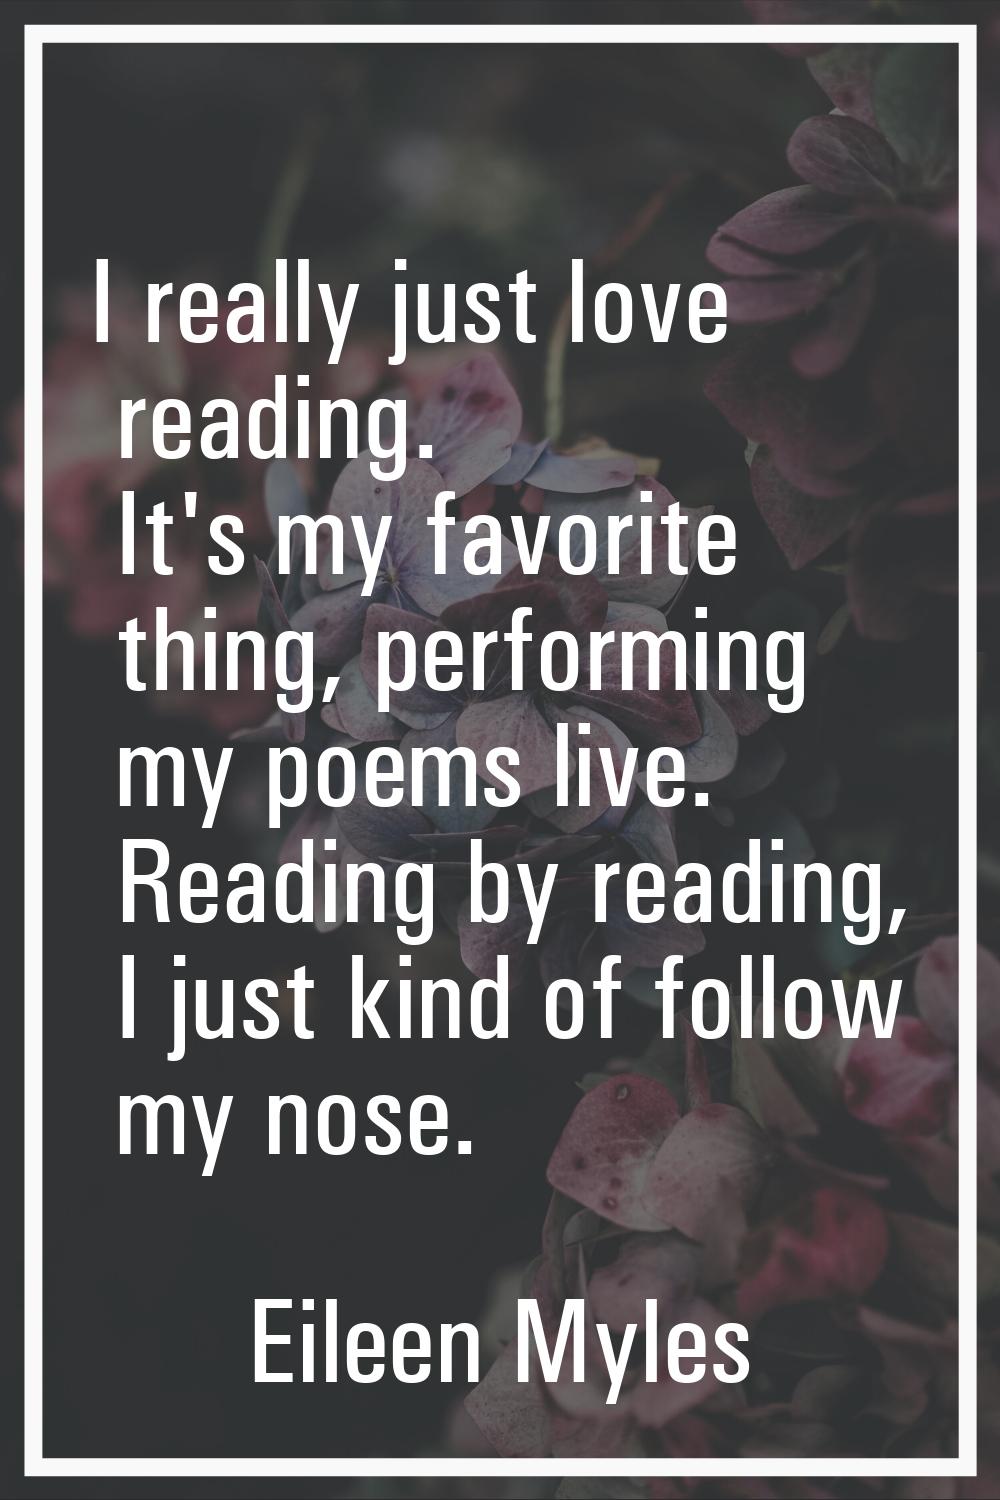 I really just love reading. It's my favorite thing, performing my poems live. Reading by reading, I